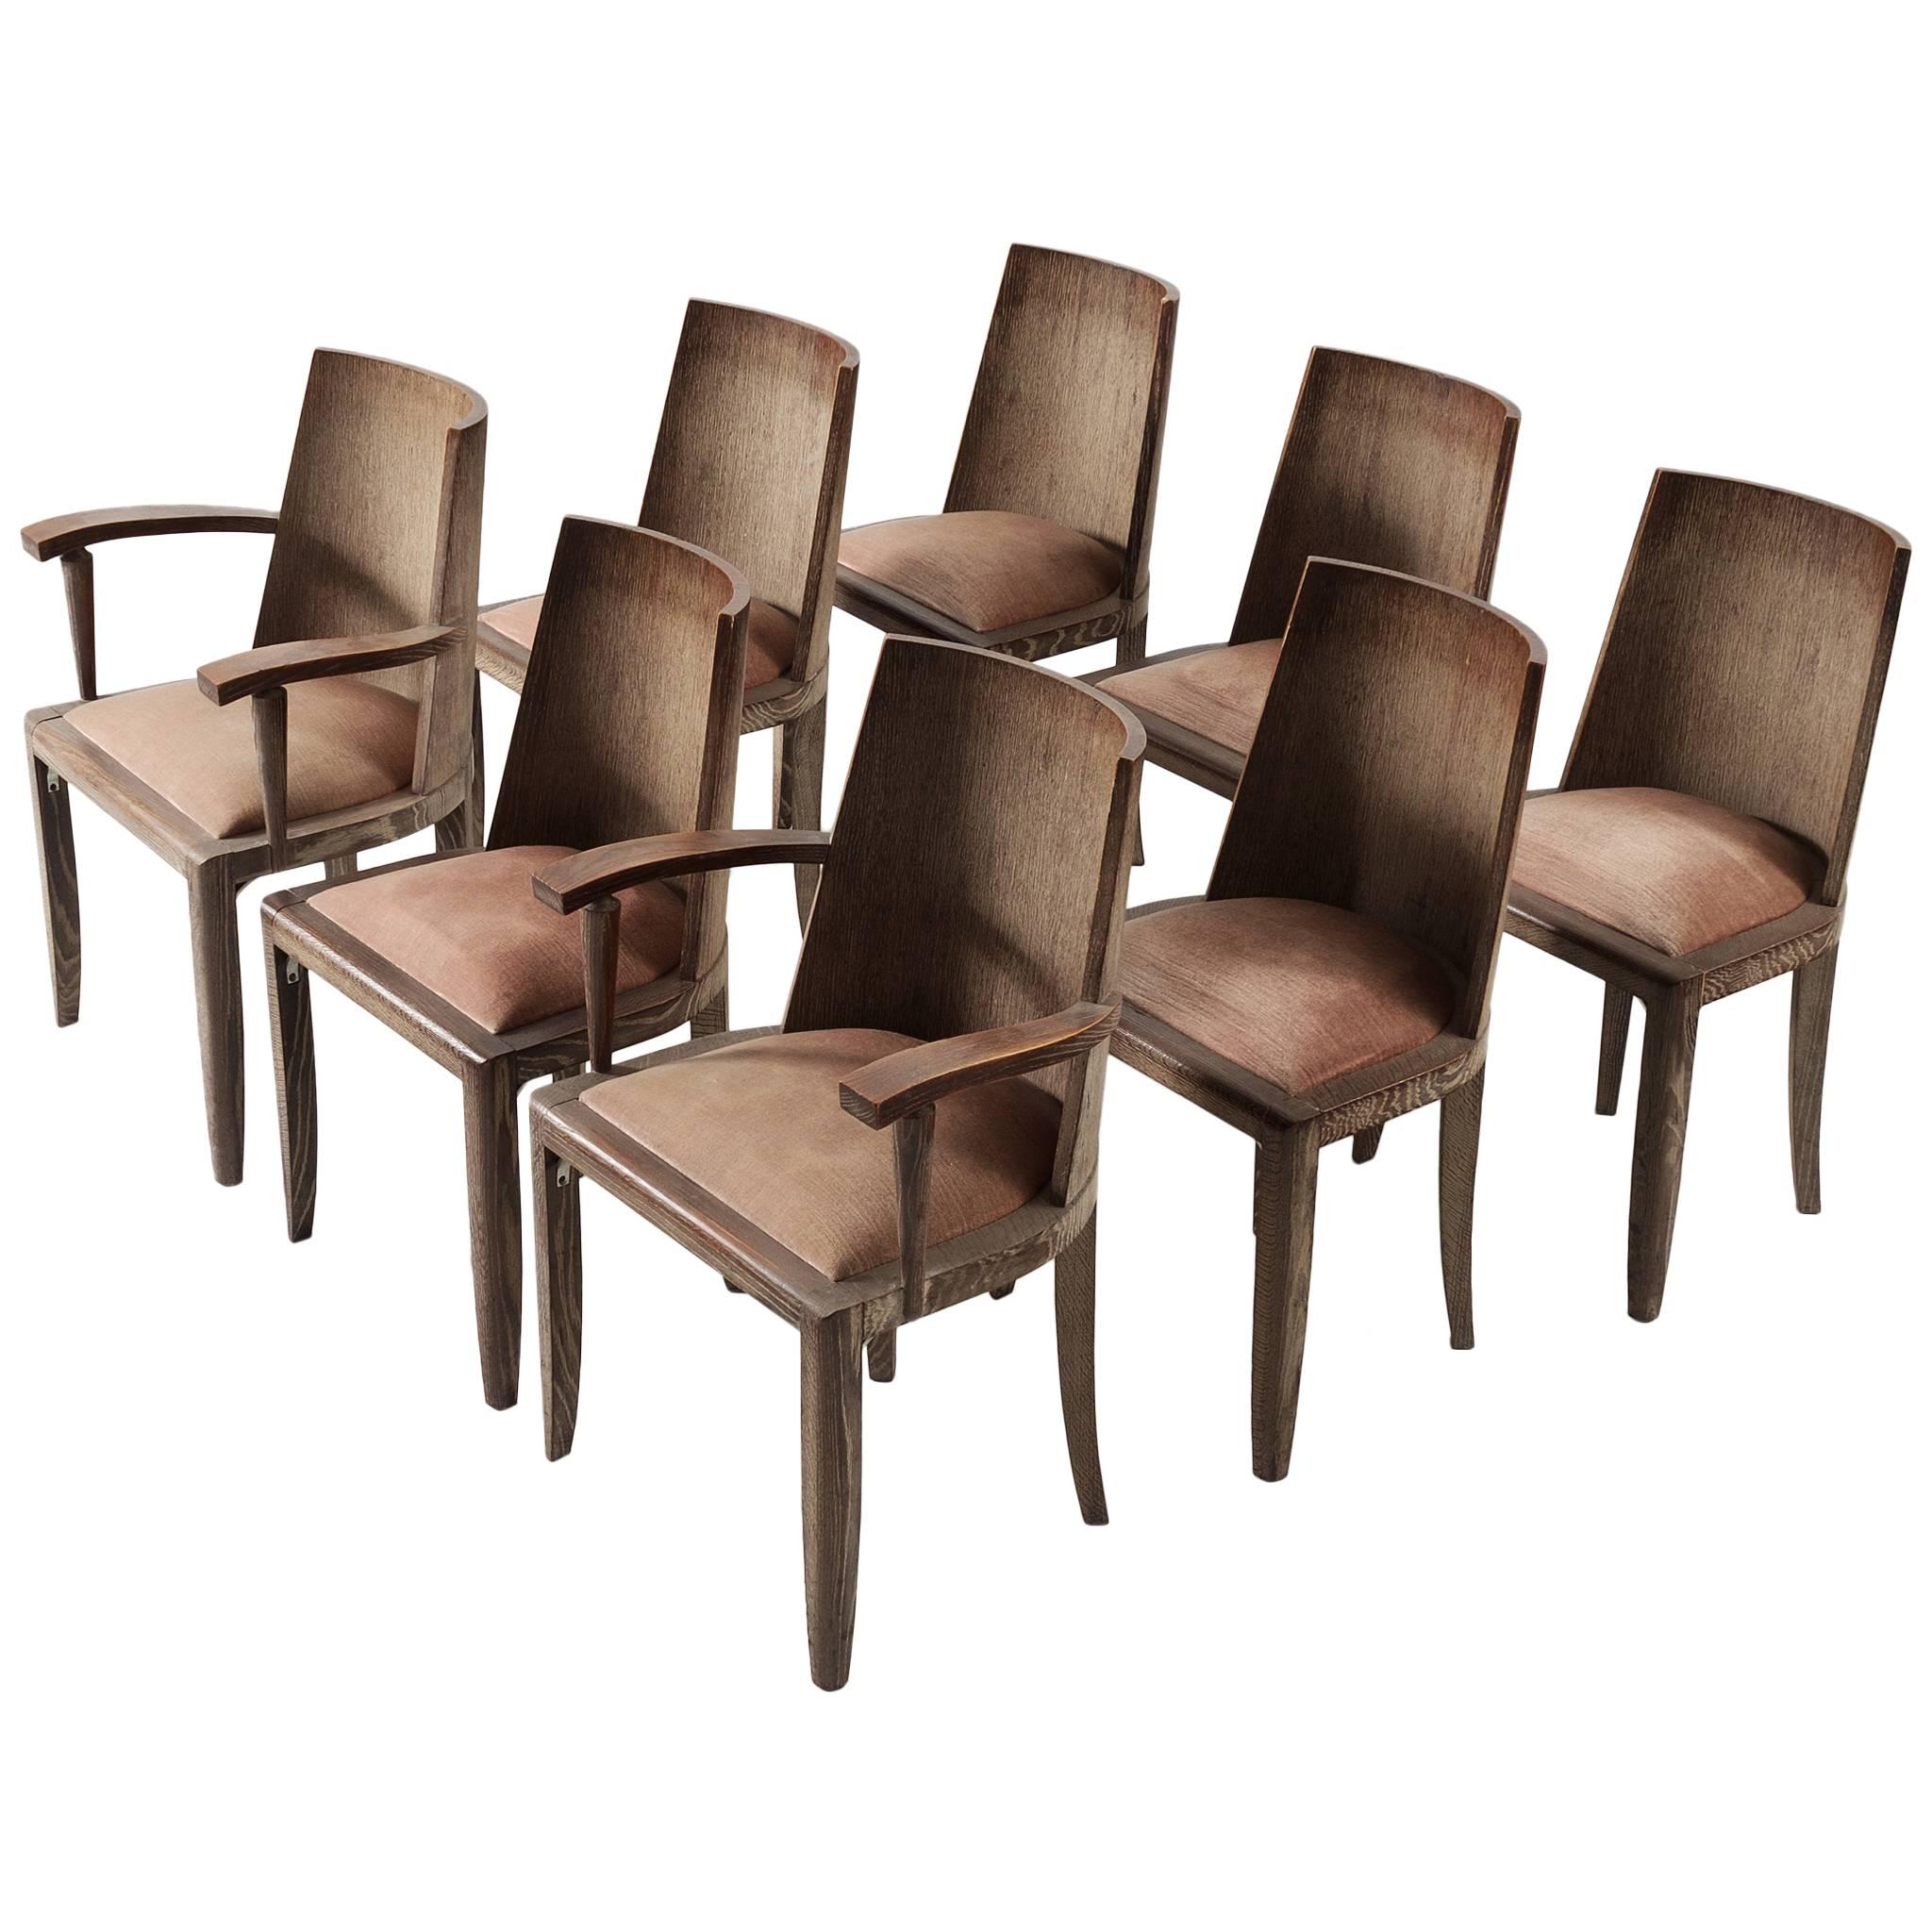 De Coene Set of Six Dining Chairs and Two Armchairs in Cerused Oak